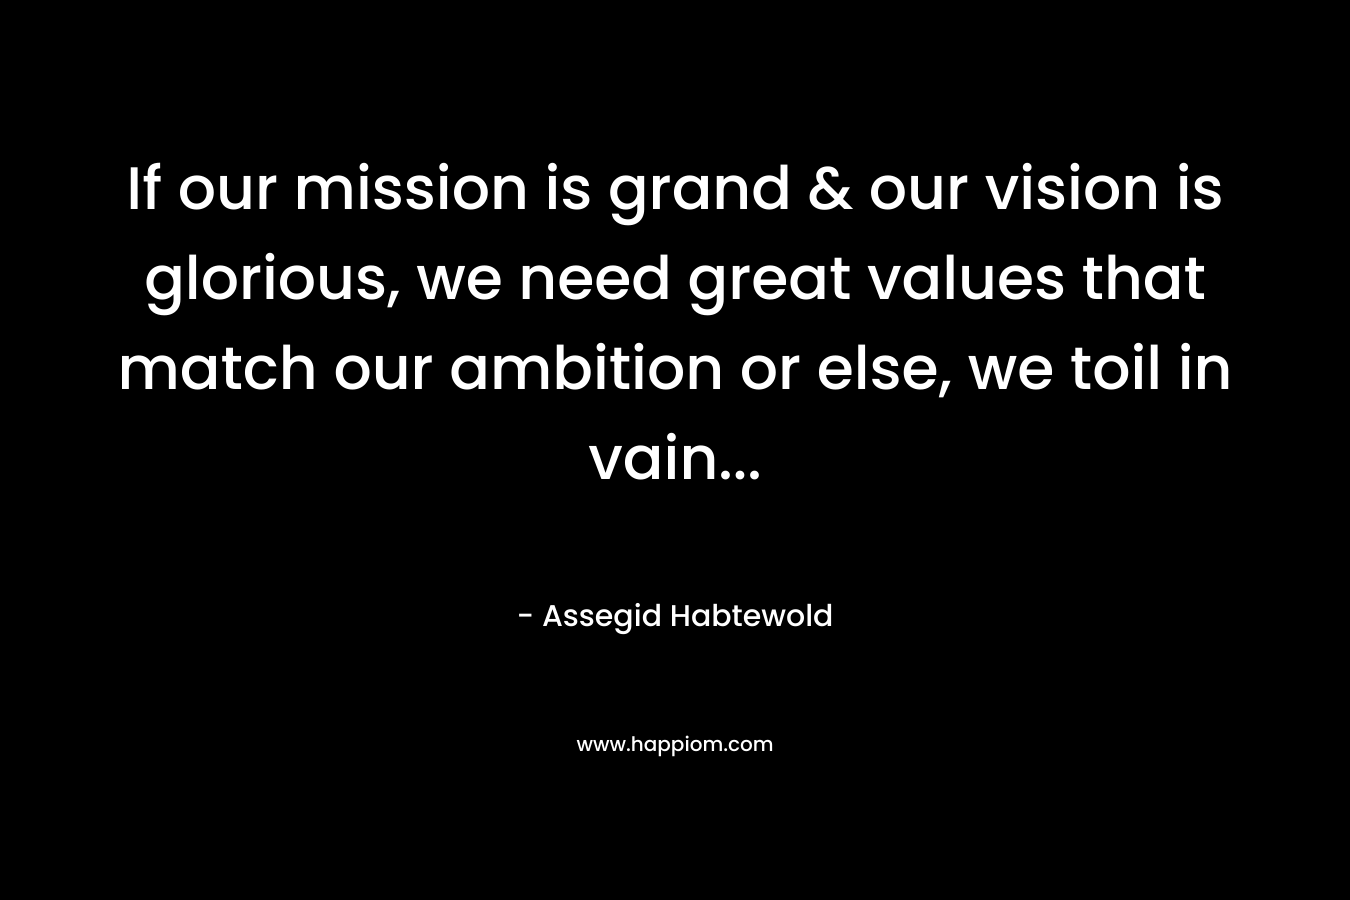 If our mission is grand & our vision is glorious, we need great values that match our ambition or else, we toil in vain… – Assegid Habtewold